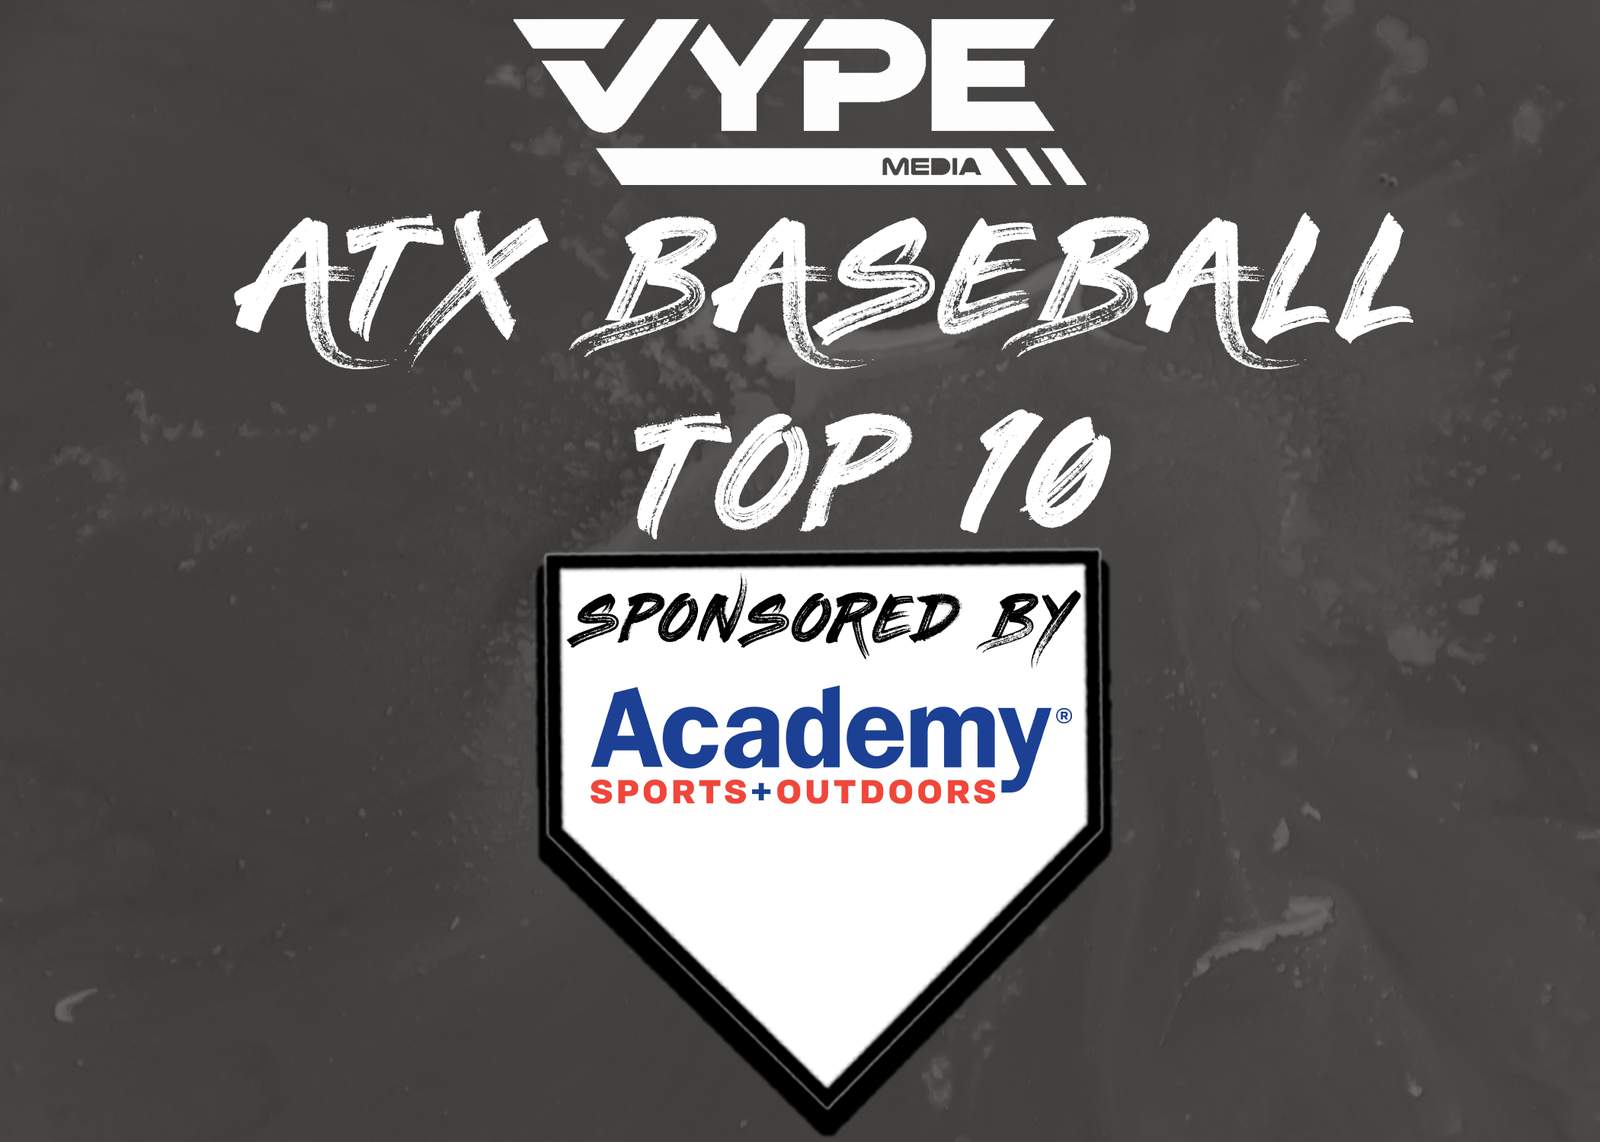 VYPE Austin Baseball Rankings: Week of 4/5/21 presented by Academy Sports + Outdoors